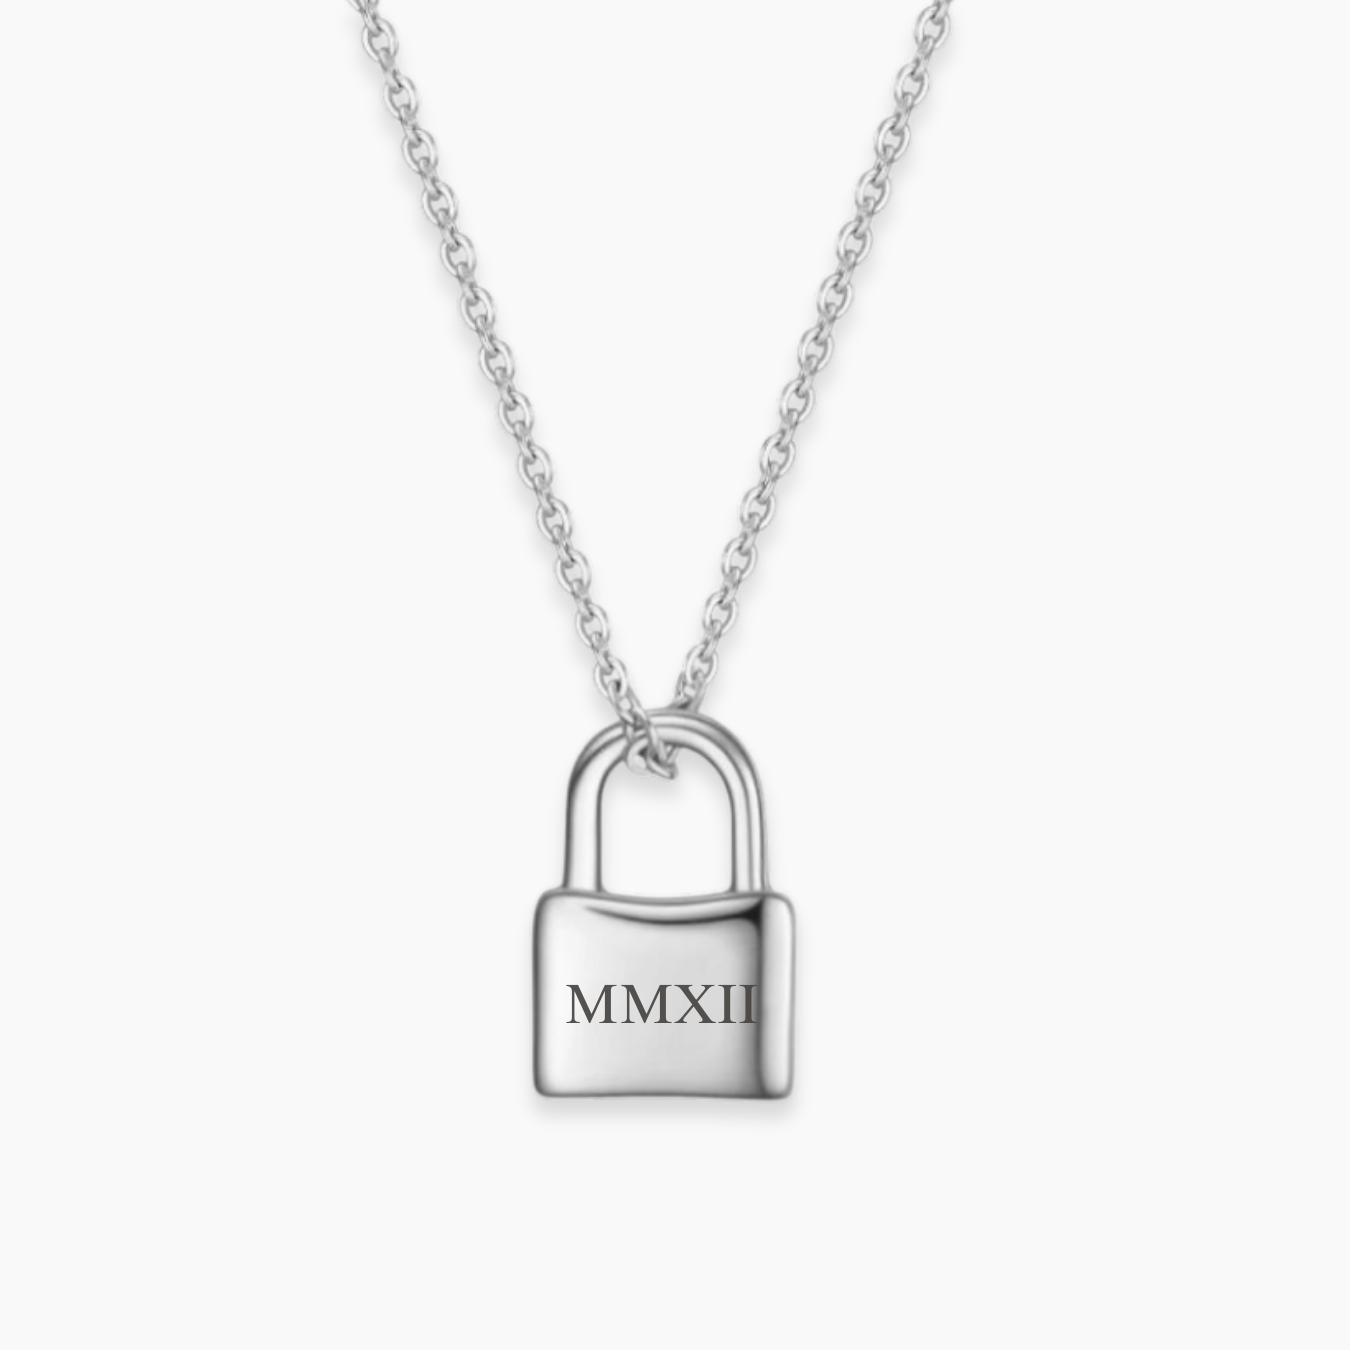 LOCK Personalizable Necklace | Custom Text